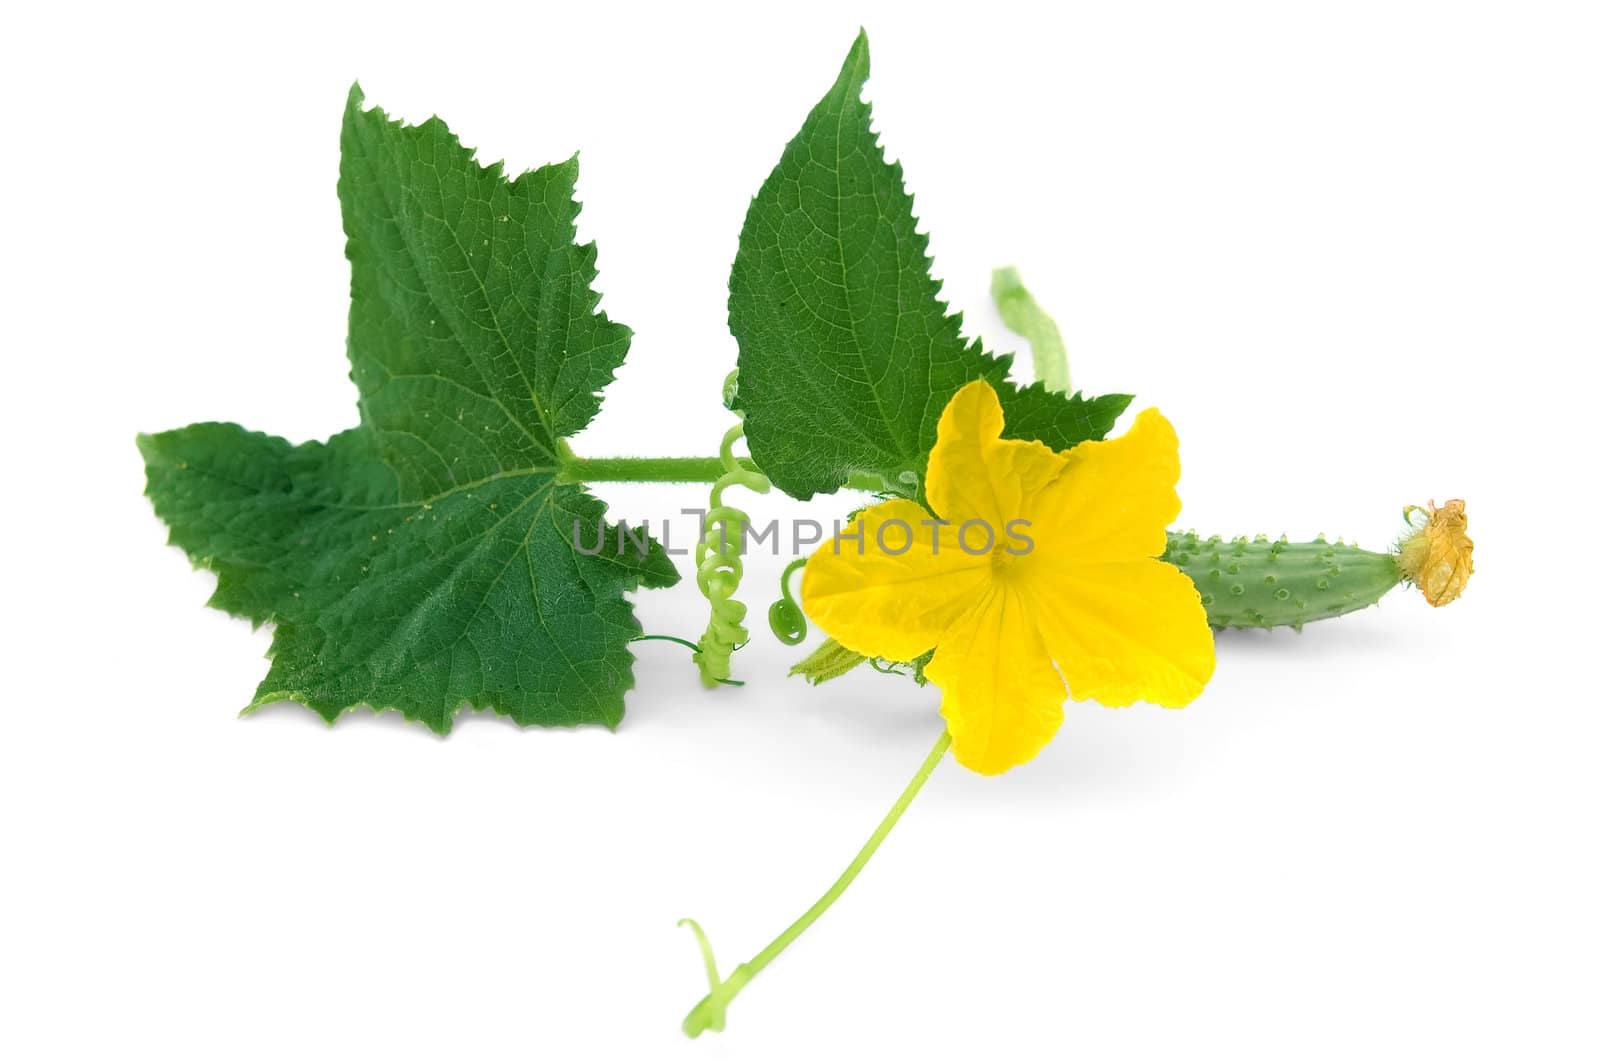 Green leaves, tendrils, yellow flowers and a small cucumber isolated on a white background